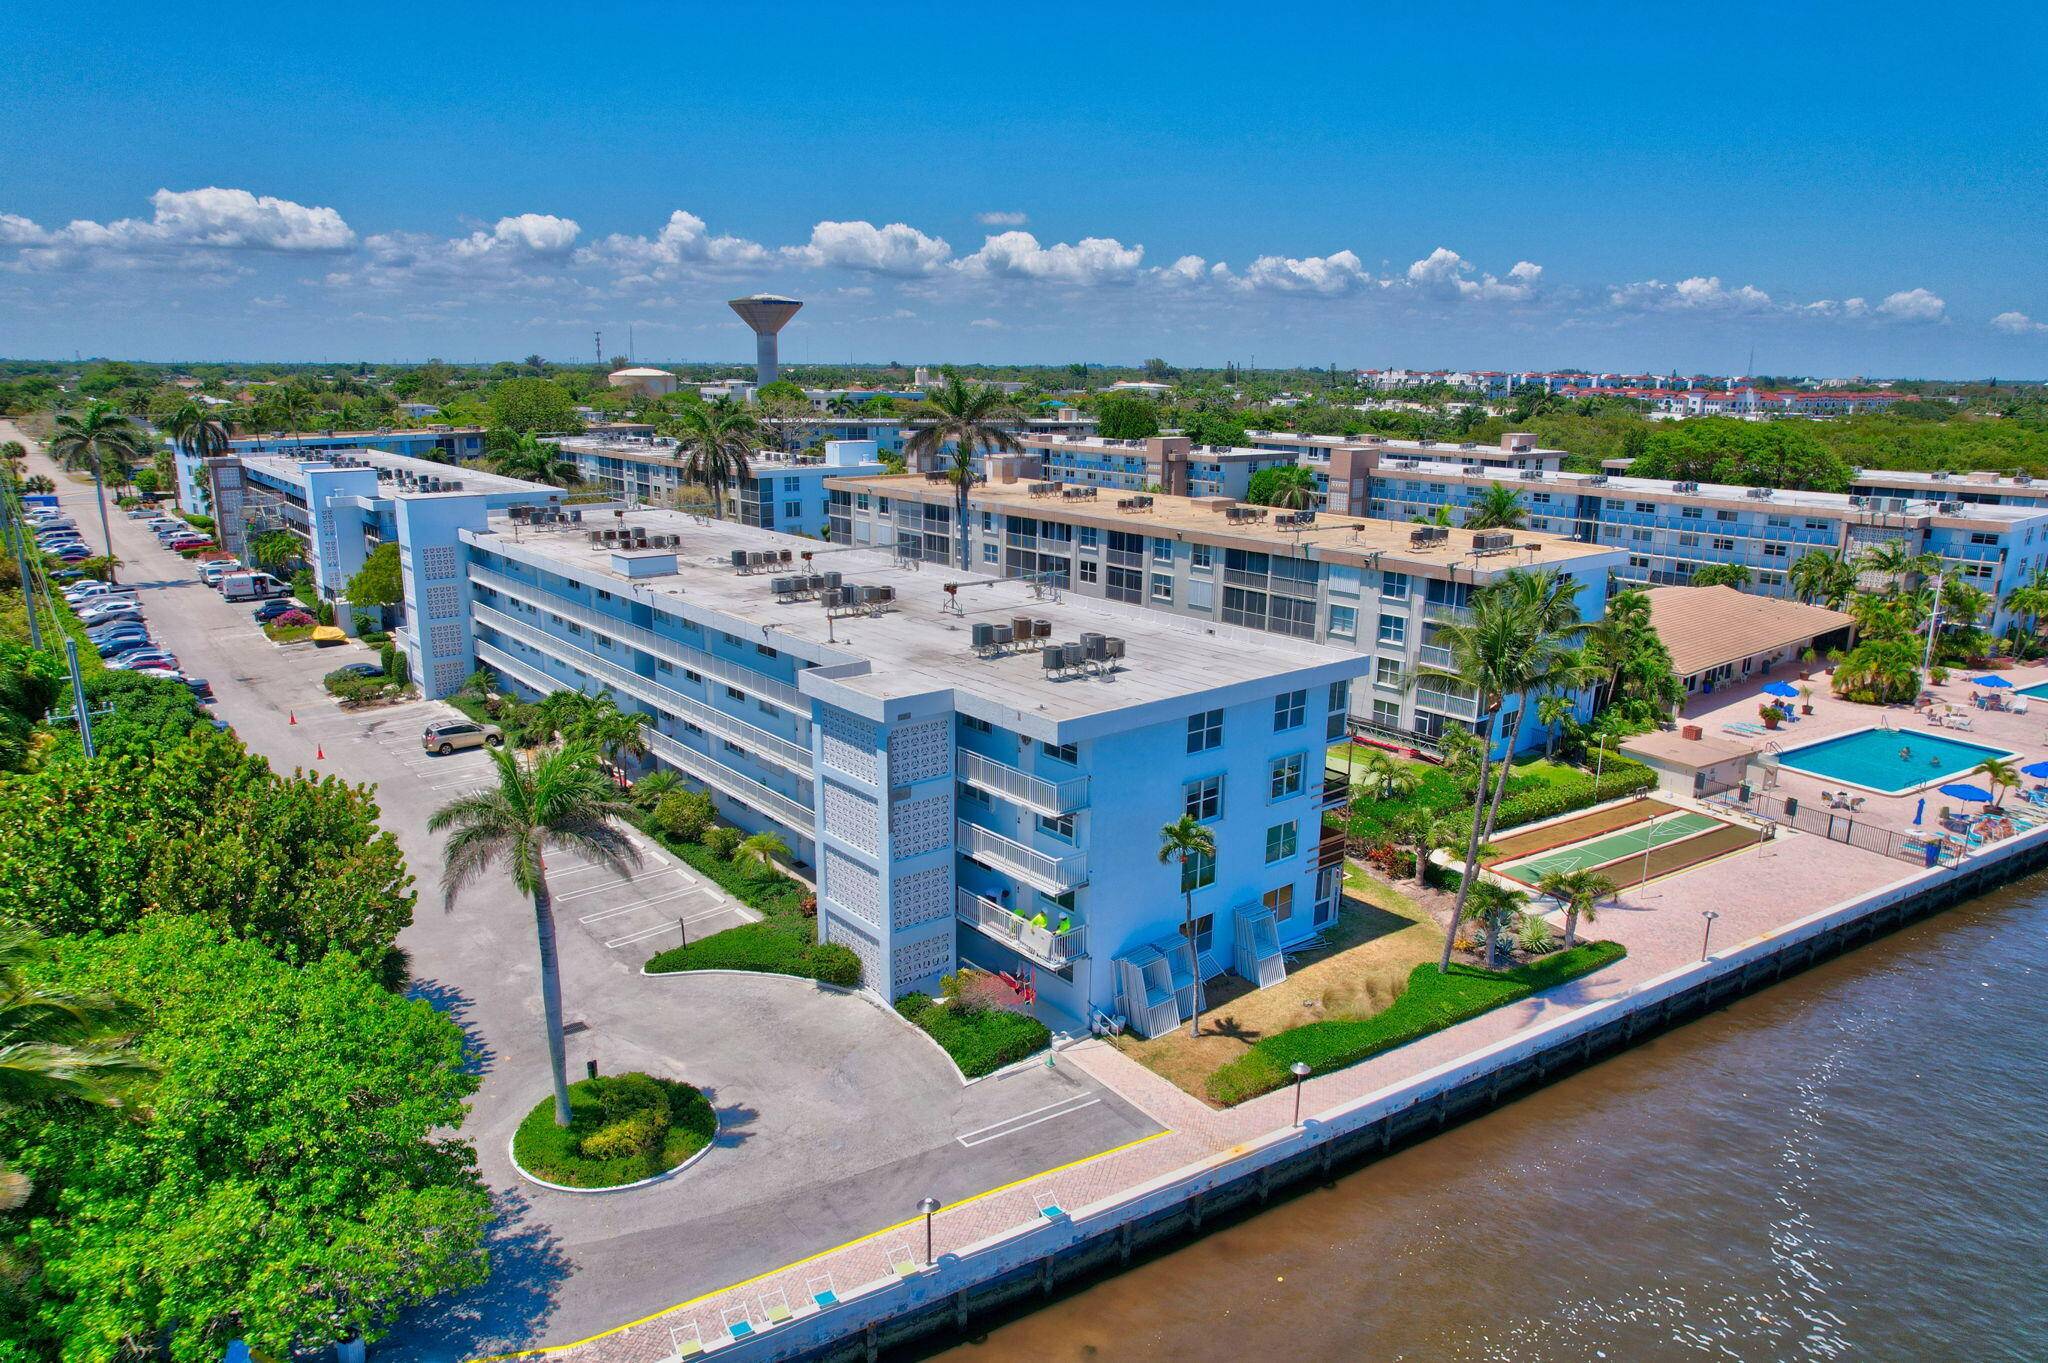 Tremendous opportunity with this 1 bedroom 1 bathroom residence with intracoastal views from the primary suite as well as the balcony.